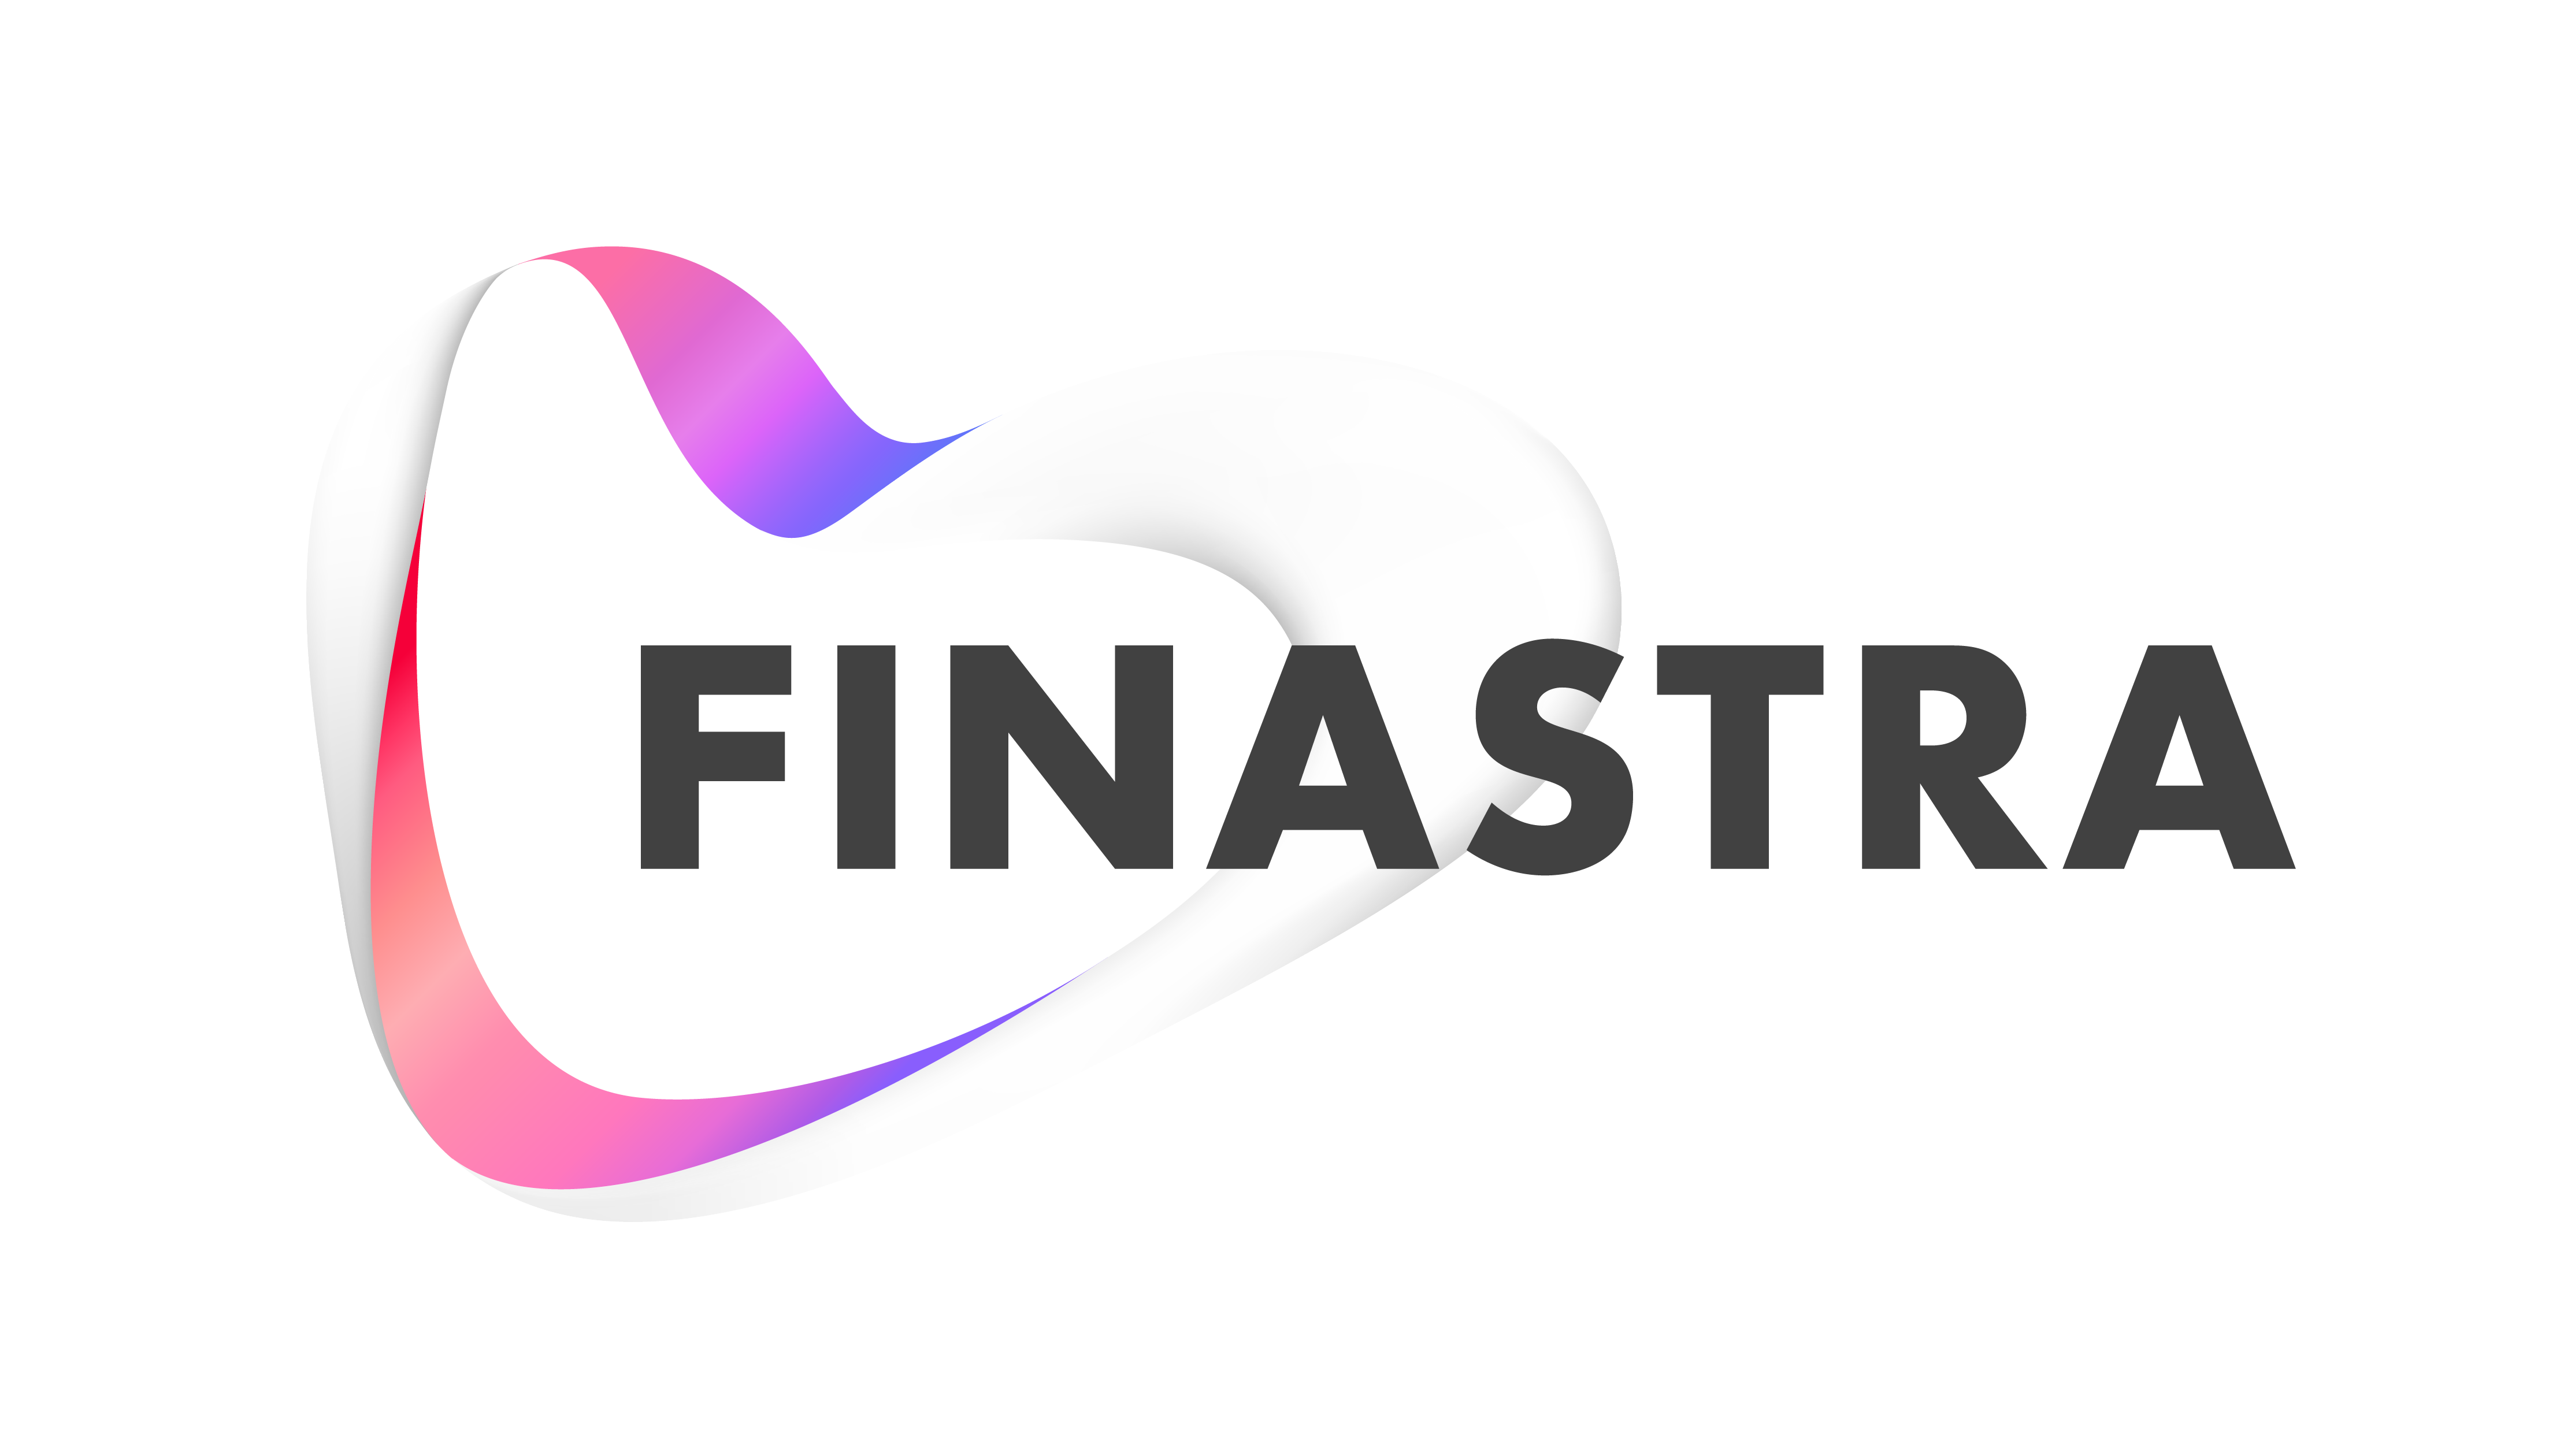 The United Bank of Egypt drives digital transformation with Finastra